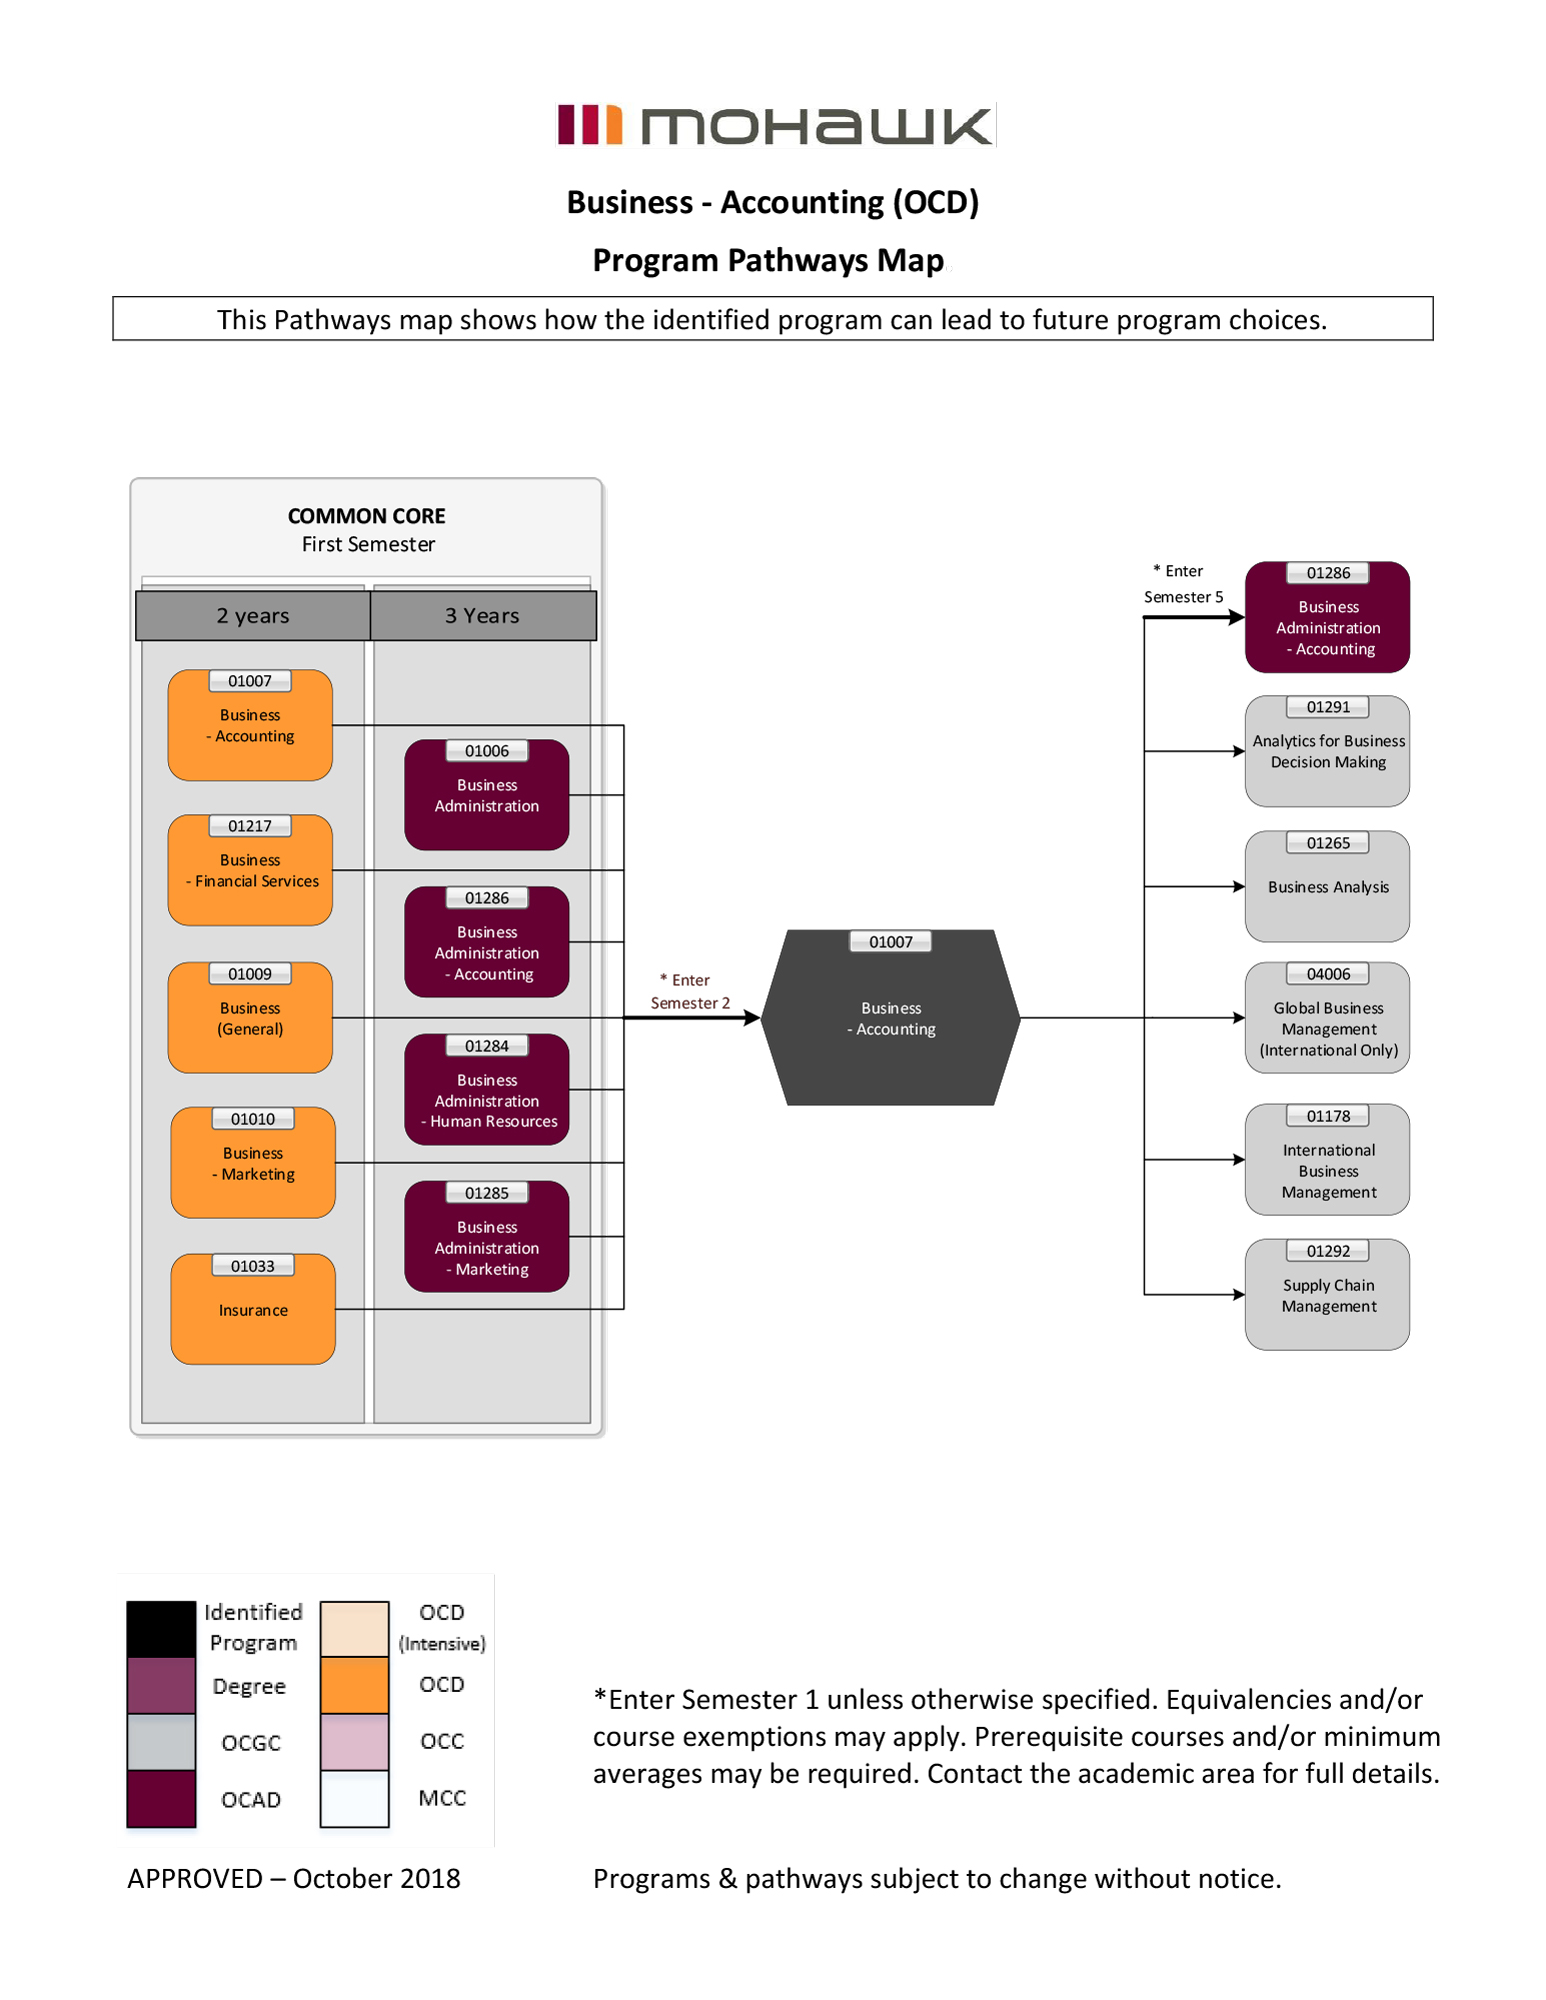 Business Accounting pathways map